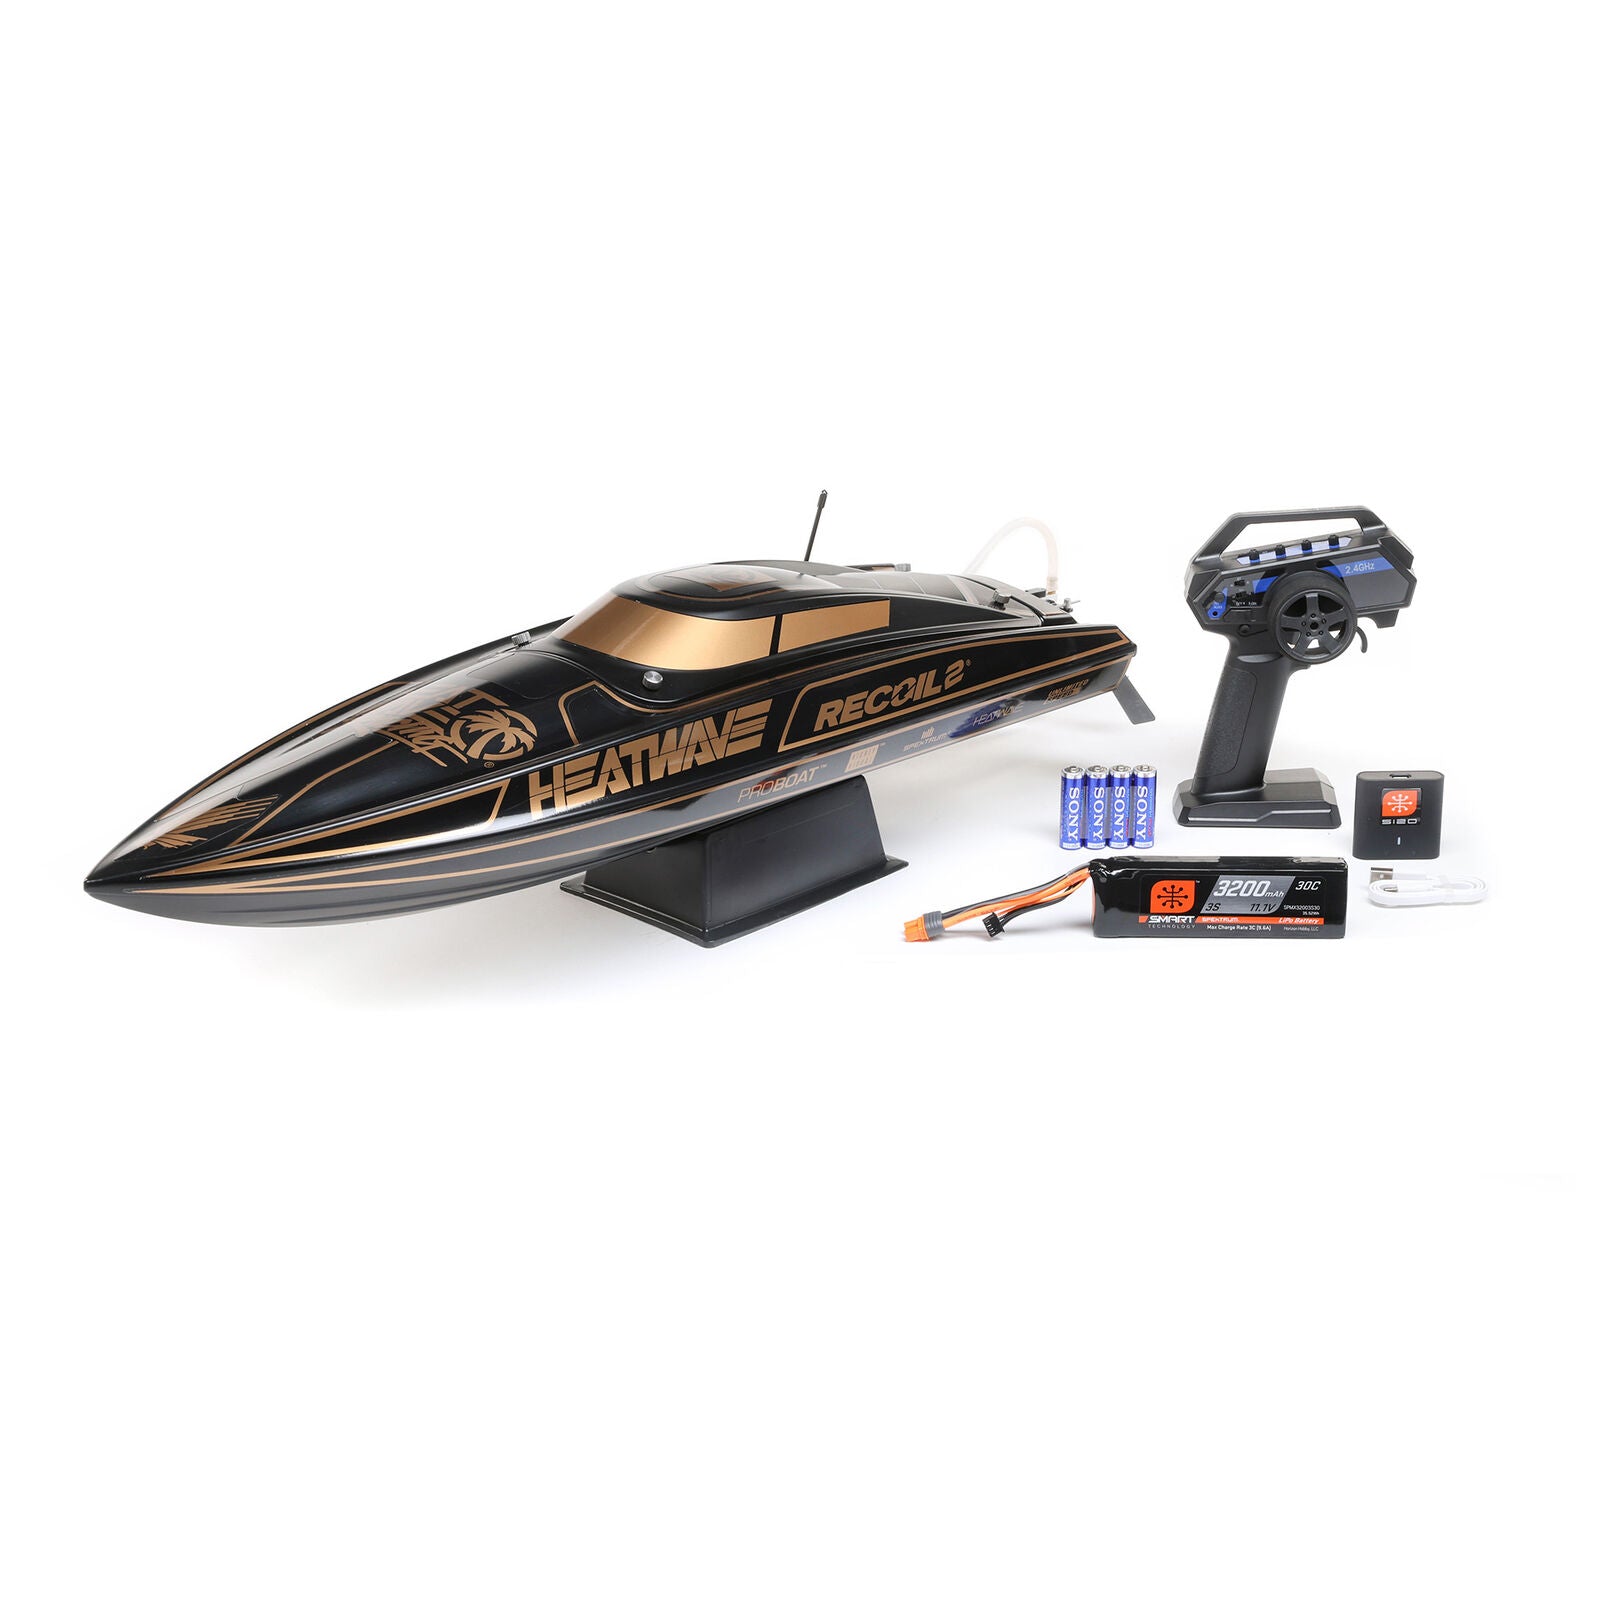 Pro Boat Recoil 2 26" Self-Righting Brushless Deep-V RTR (Heatwave) - PRB08041T1